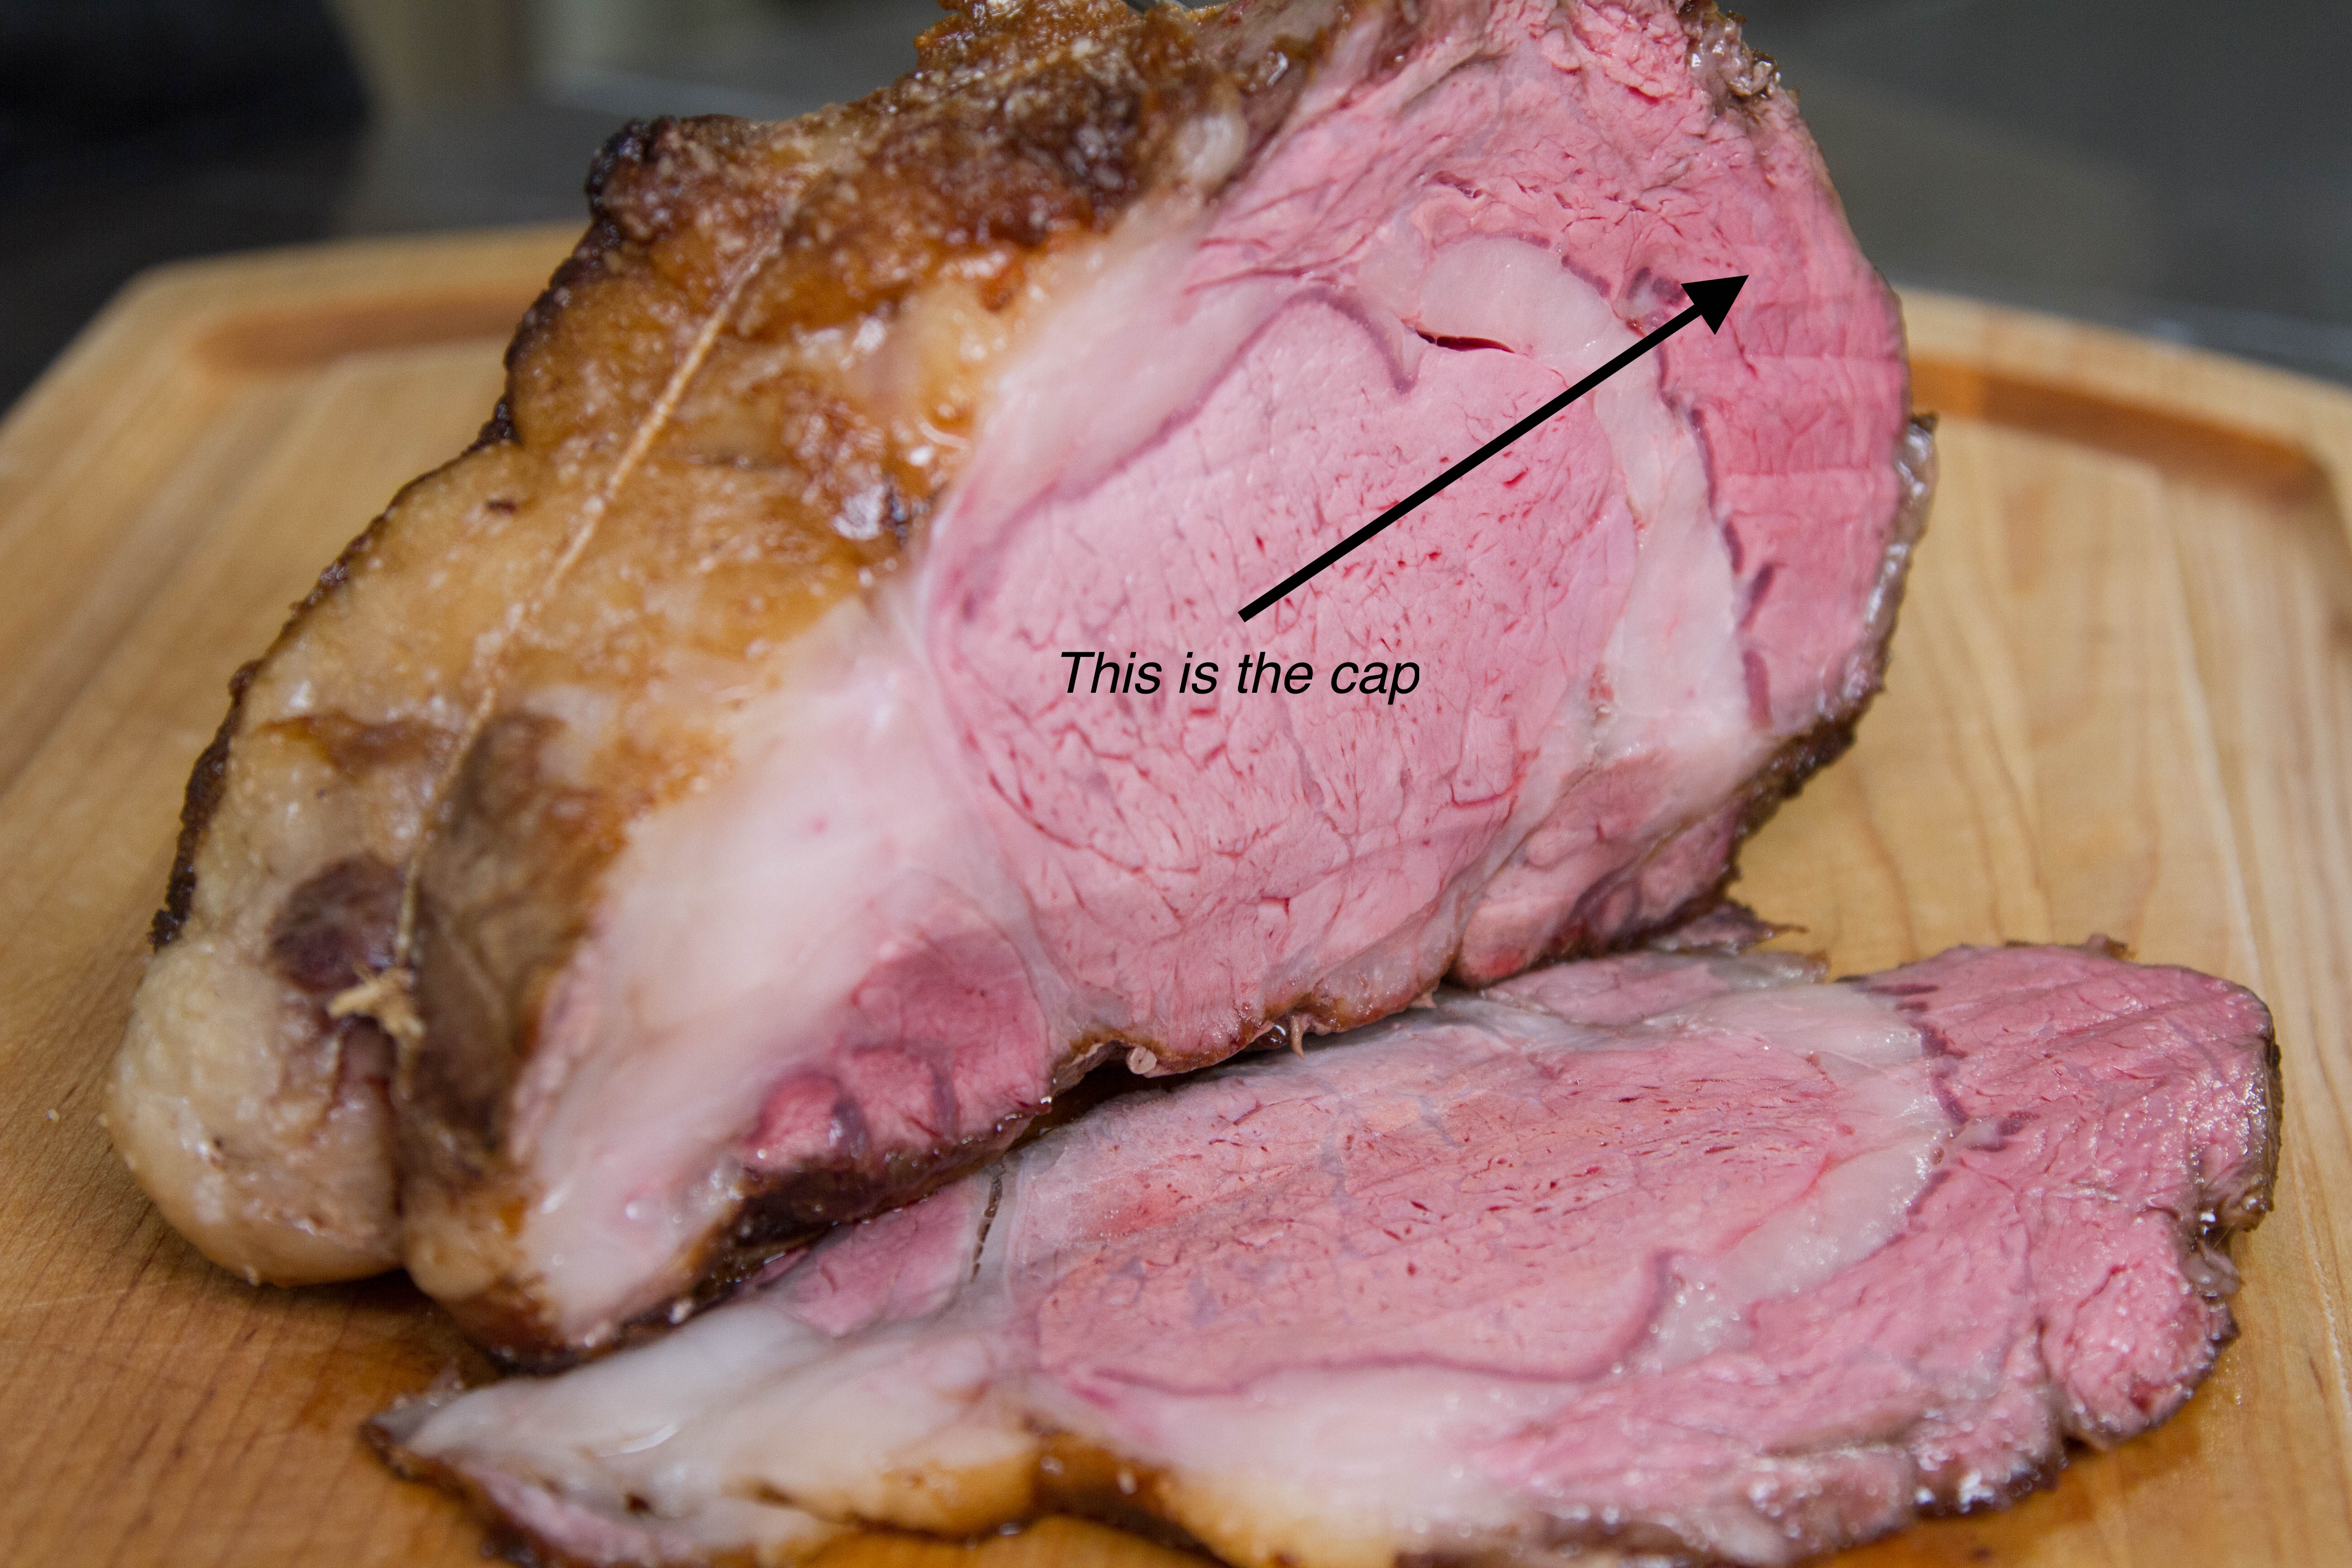 https://blog.thermoworks.com/wp-content/uploads/2018/12/prime_rib_loggers_chefalarm-13-of-84.jpg